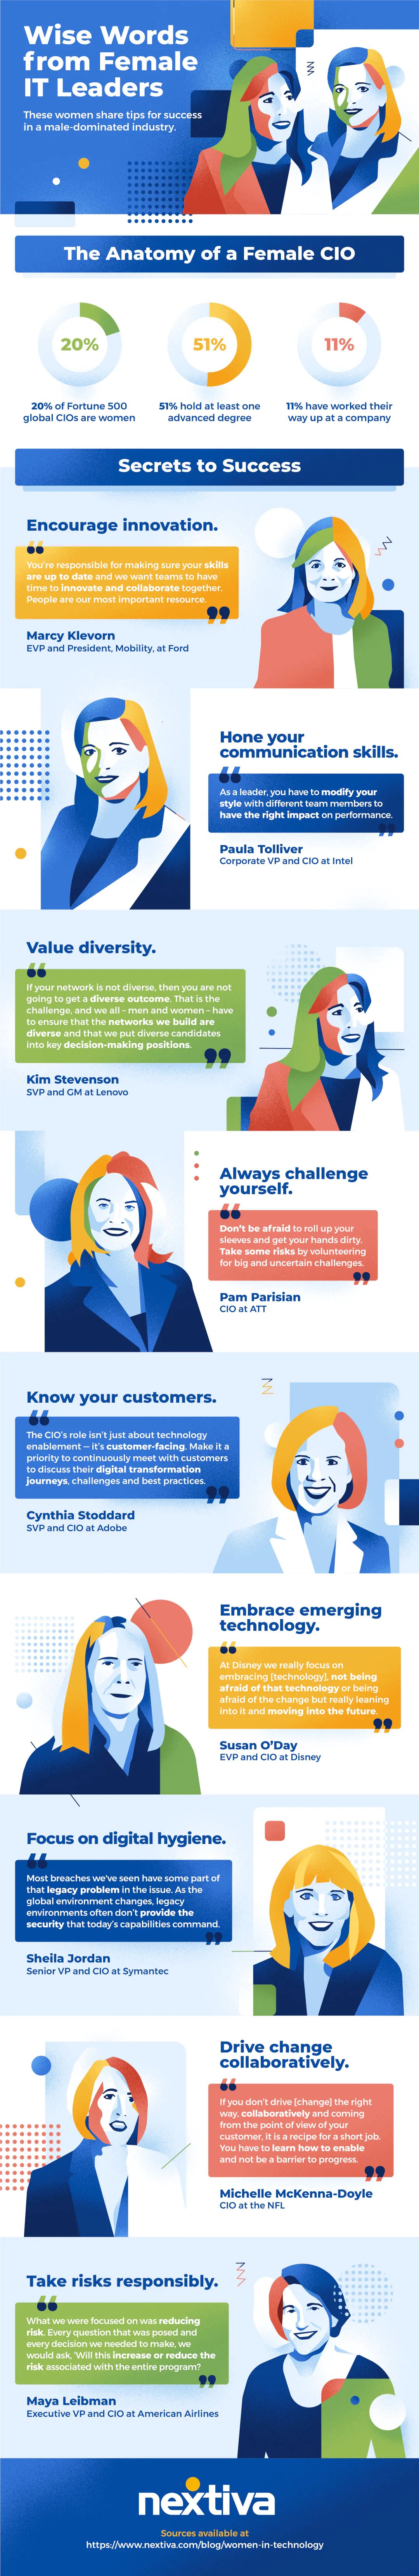 Wise Words from Women IT Leaders - Infographic